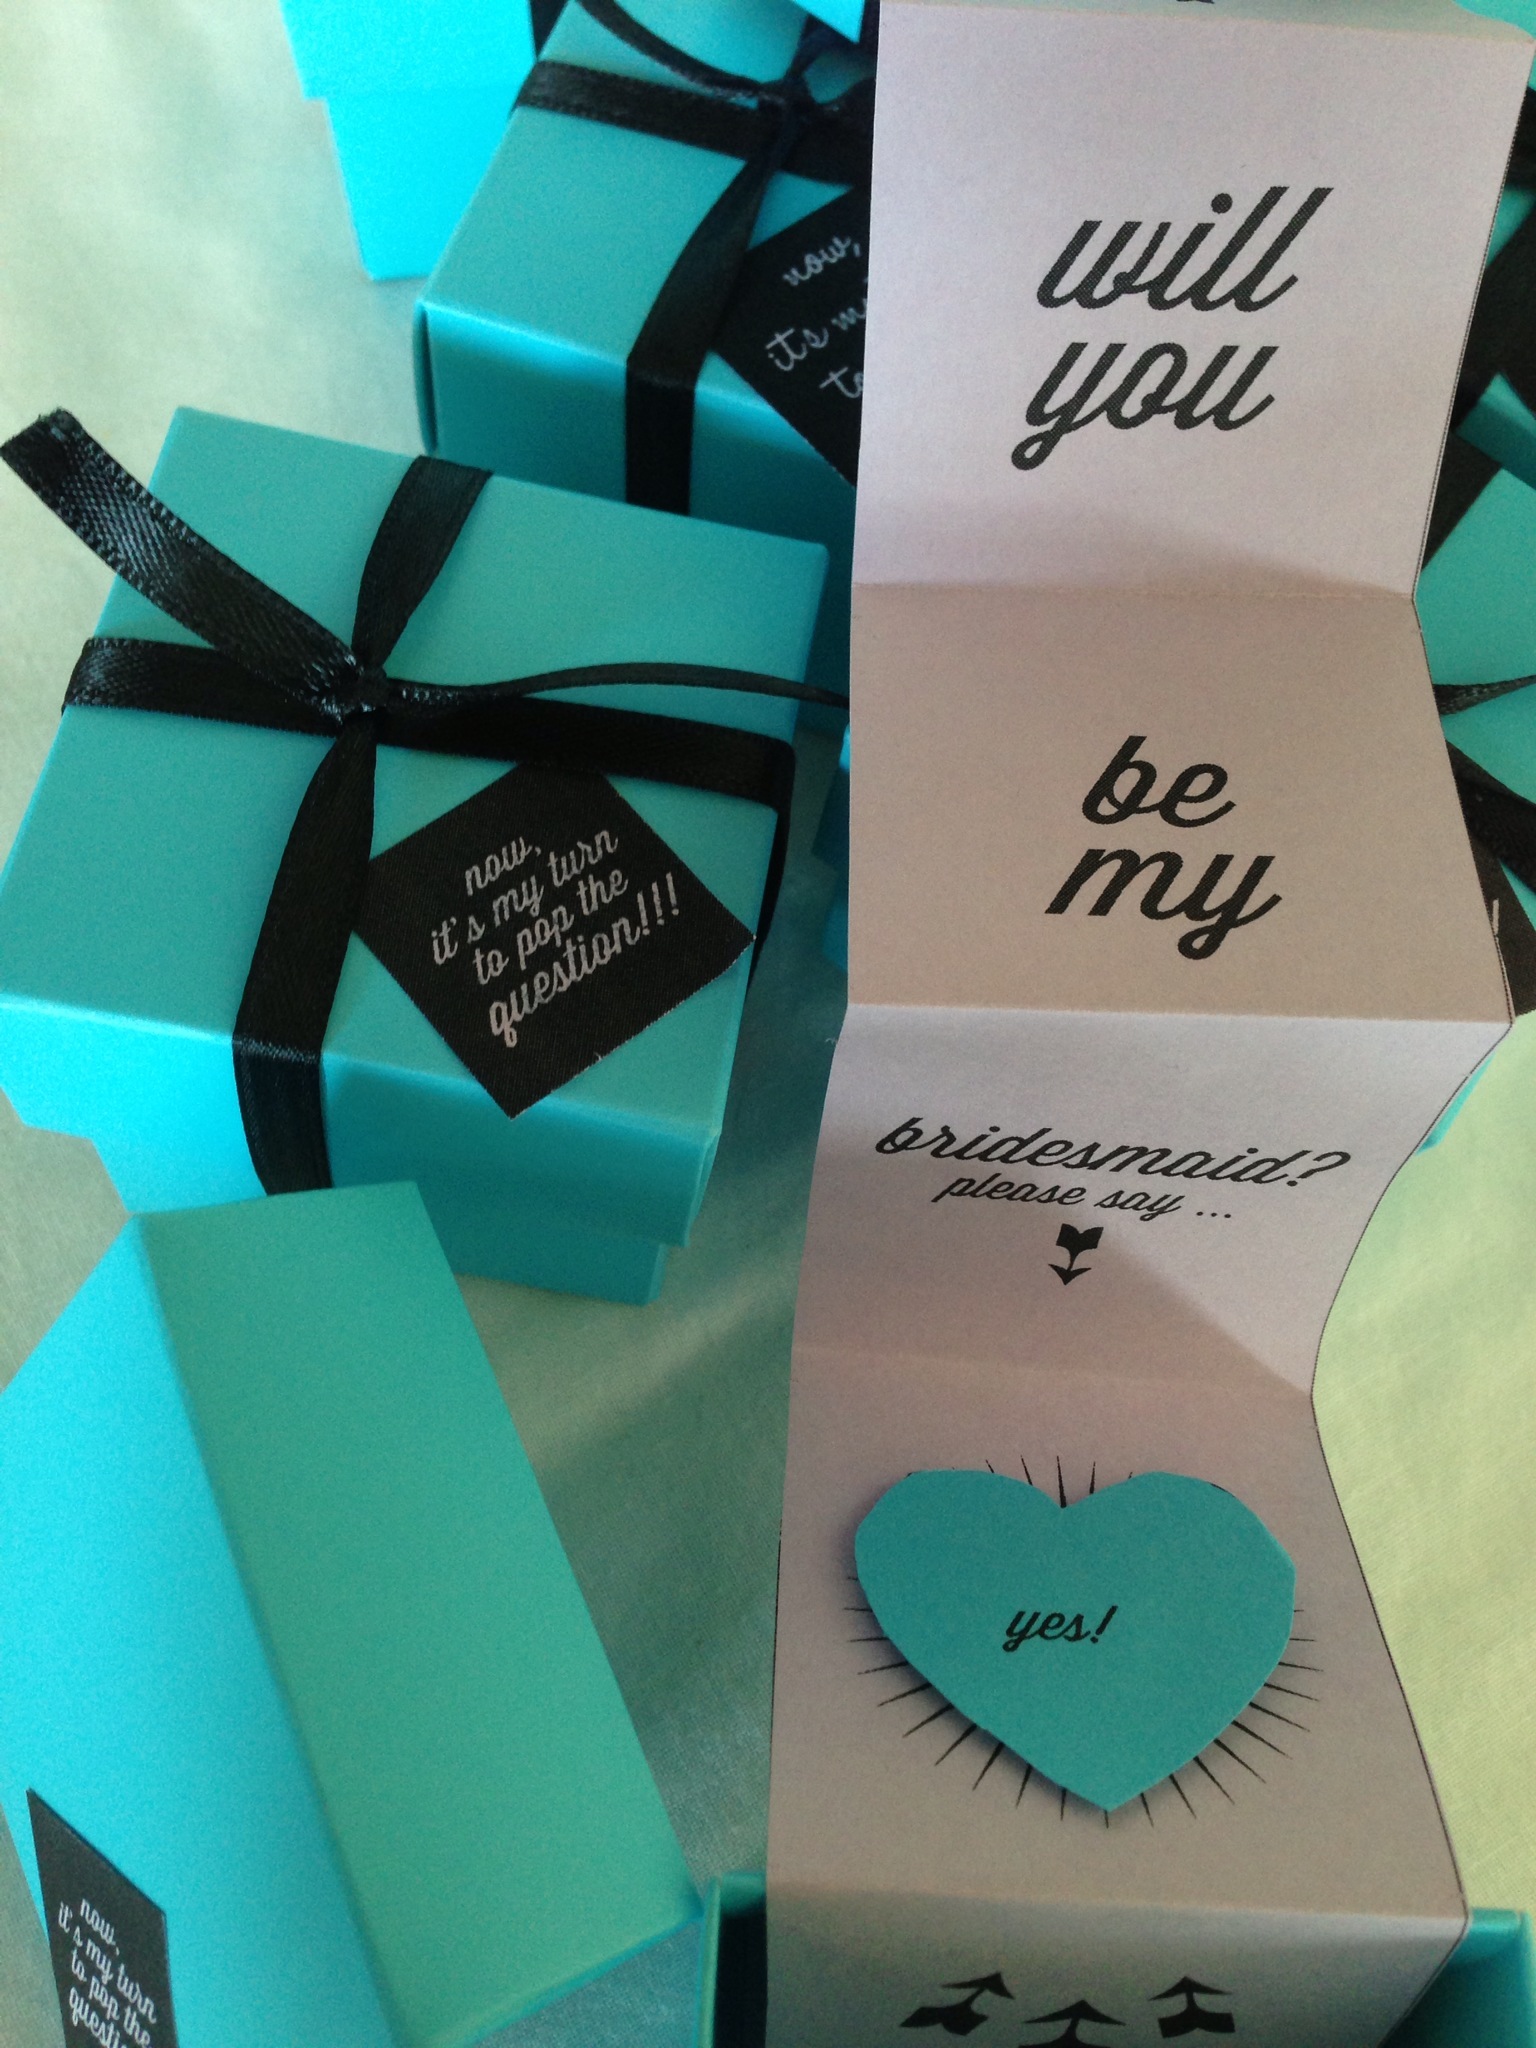 Will You Be My Bridesmaid Craft | The Majestic Vision Wedding Planning | Palm Beach, FL and Milwaukee, WI | www.themajesticvision.com